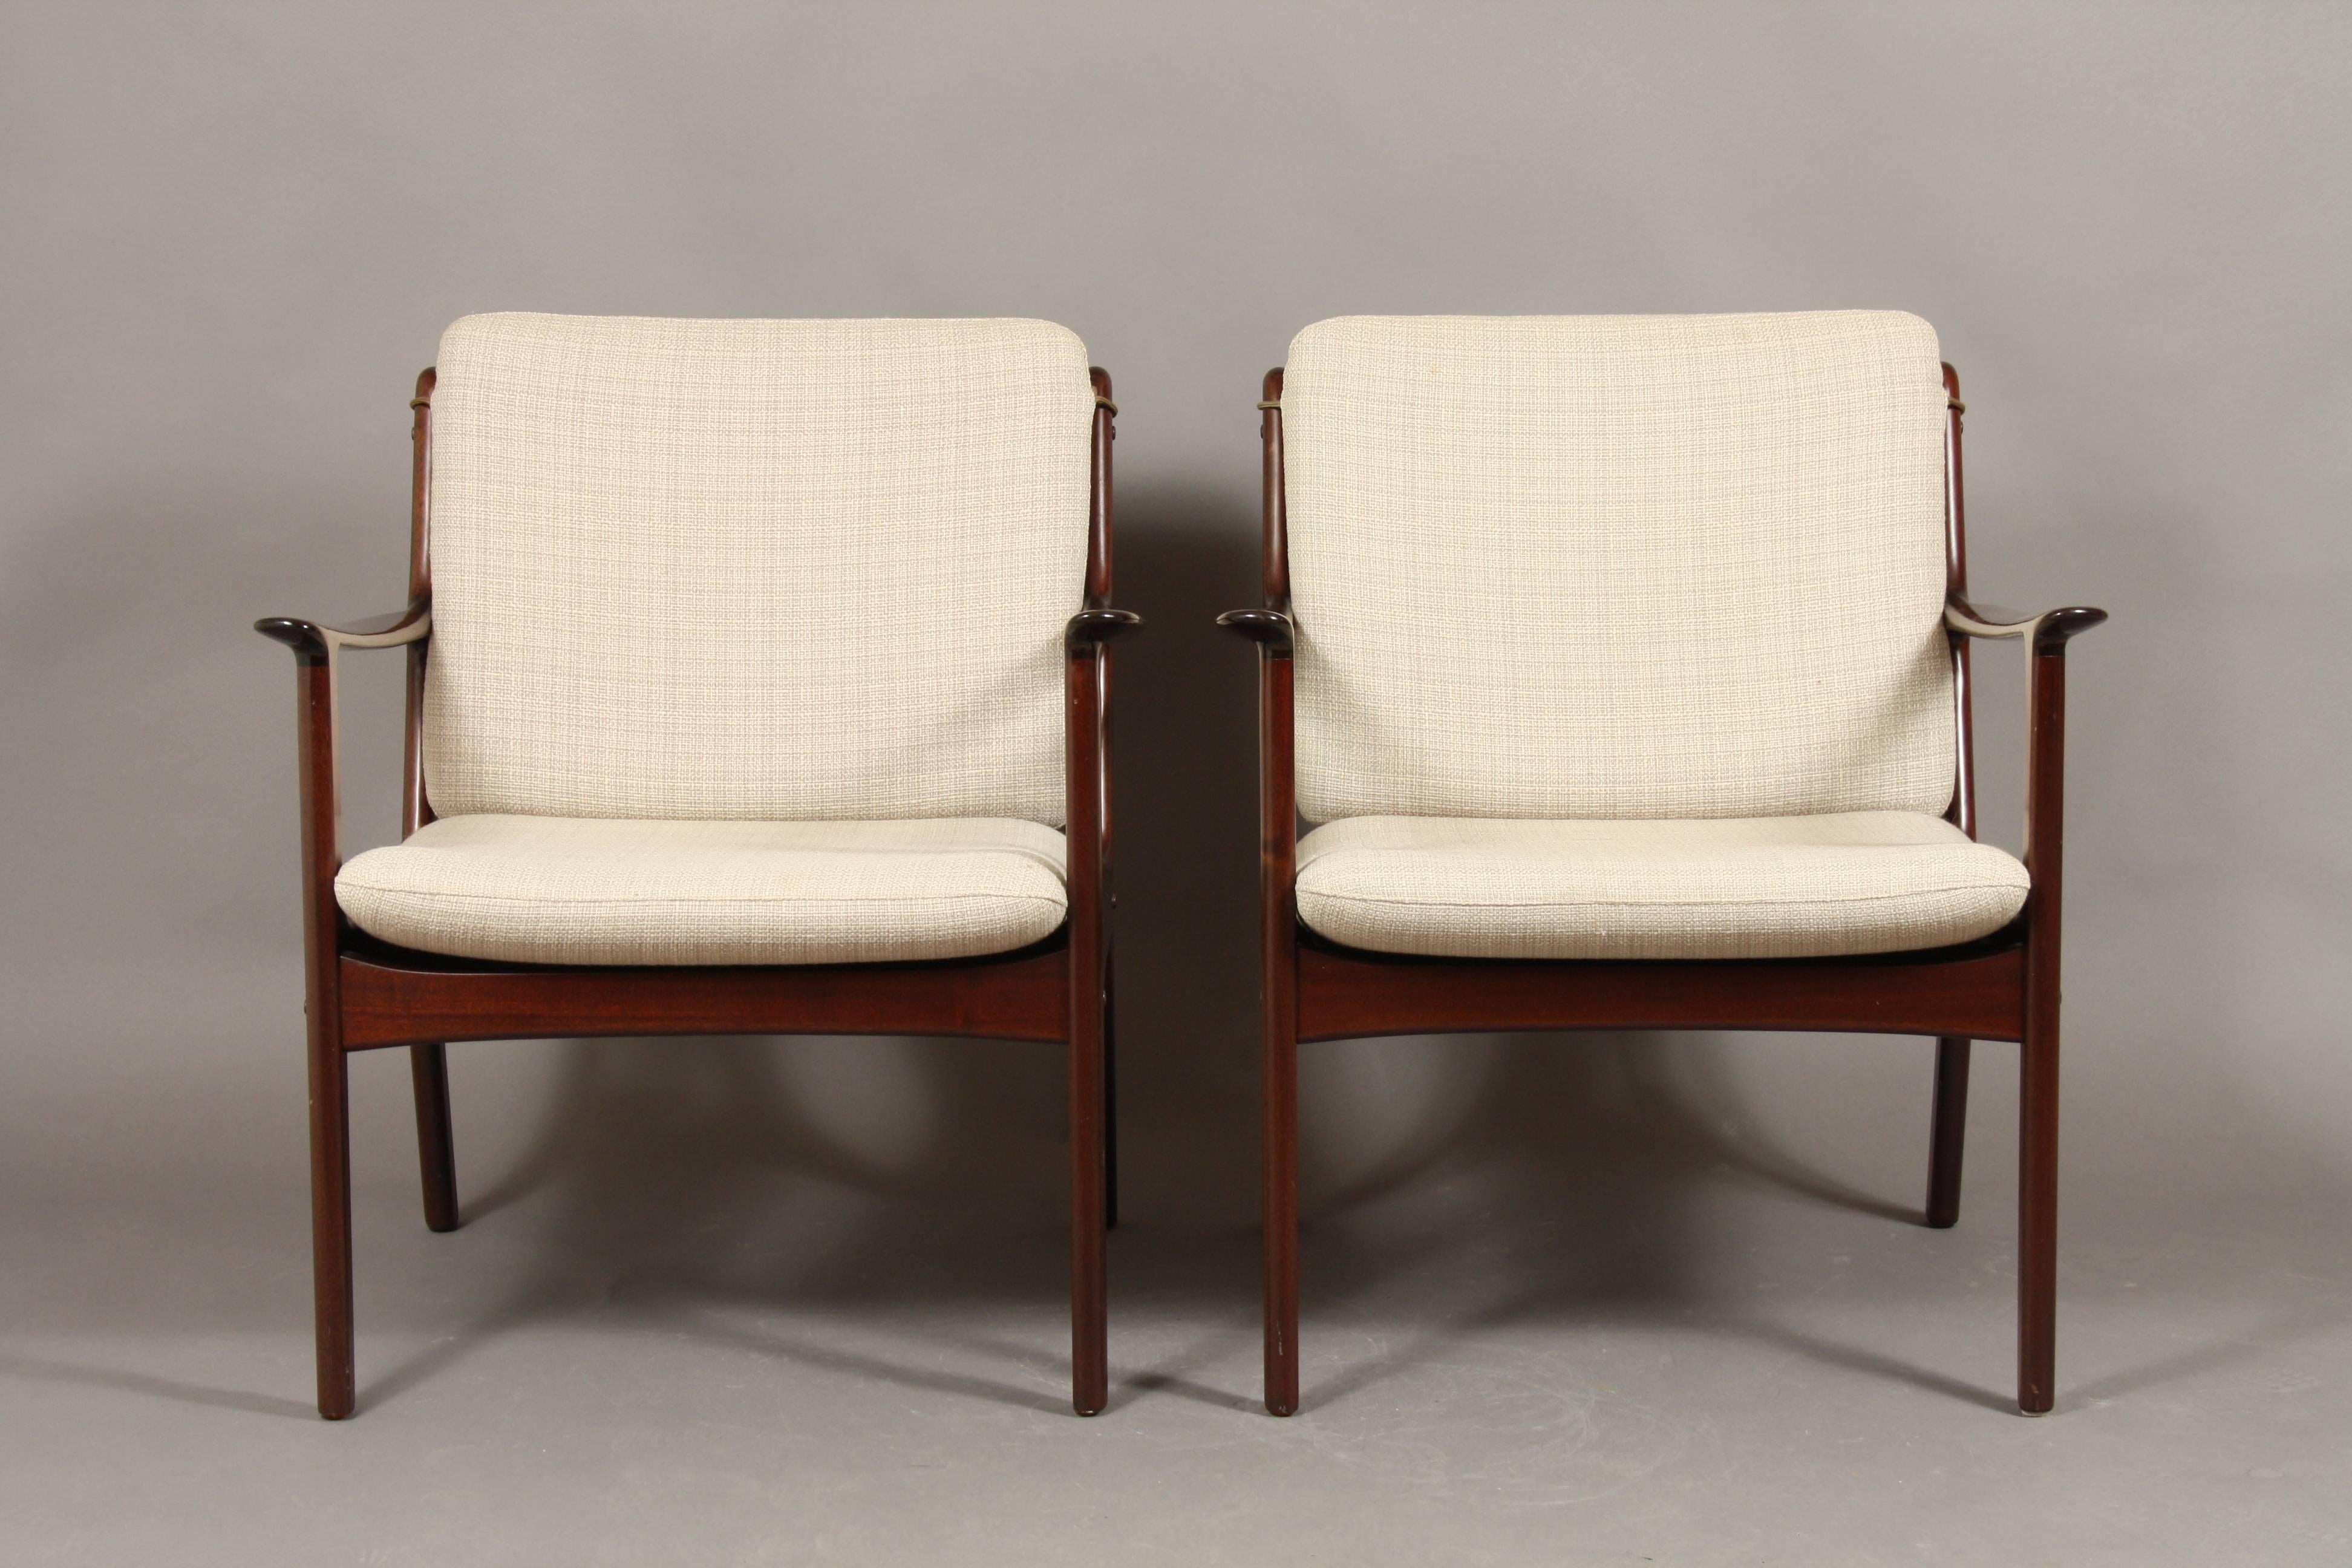 Classic Ole Wanscher design. Pair of easy chairs model PJ 112 designed in 1951 and produced by P. Jeppesen Møbelfabrik. Marked at the bottom with Danish Design mark and PJ mark. Original cushions in light wool, with leather straps. Very good